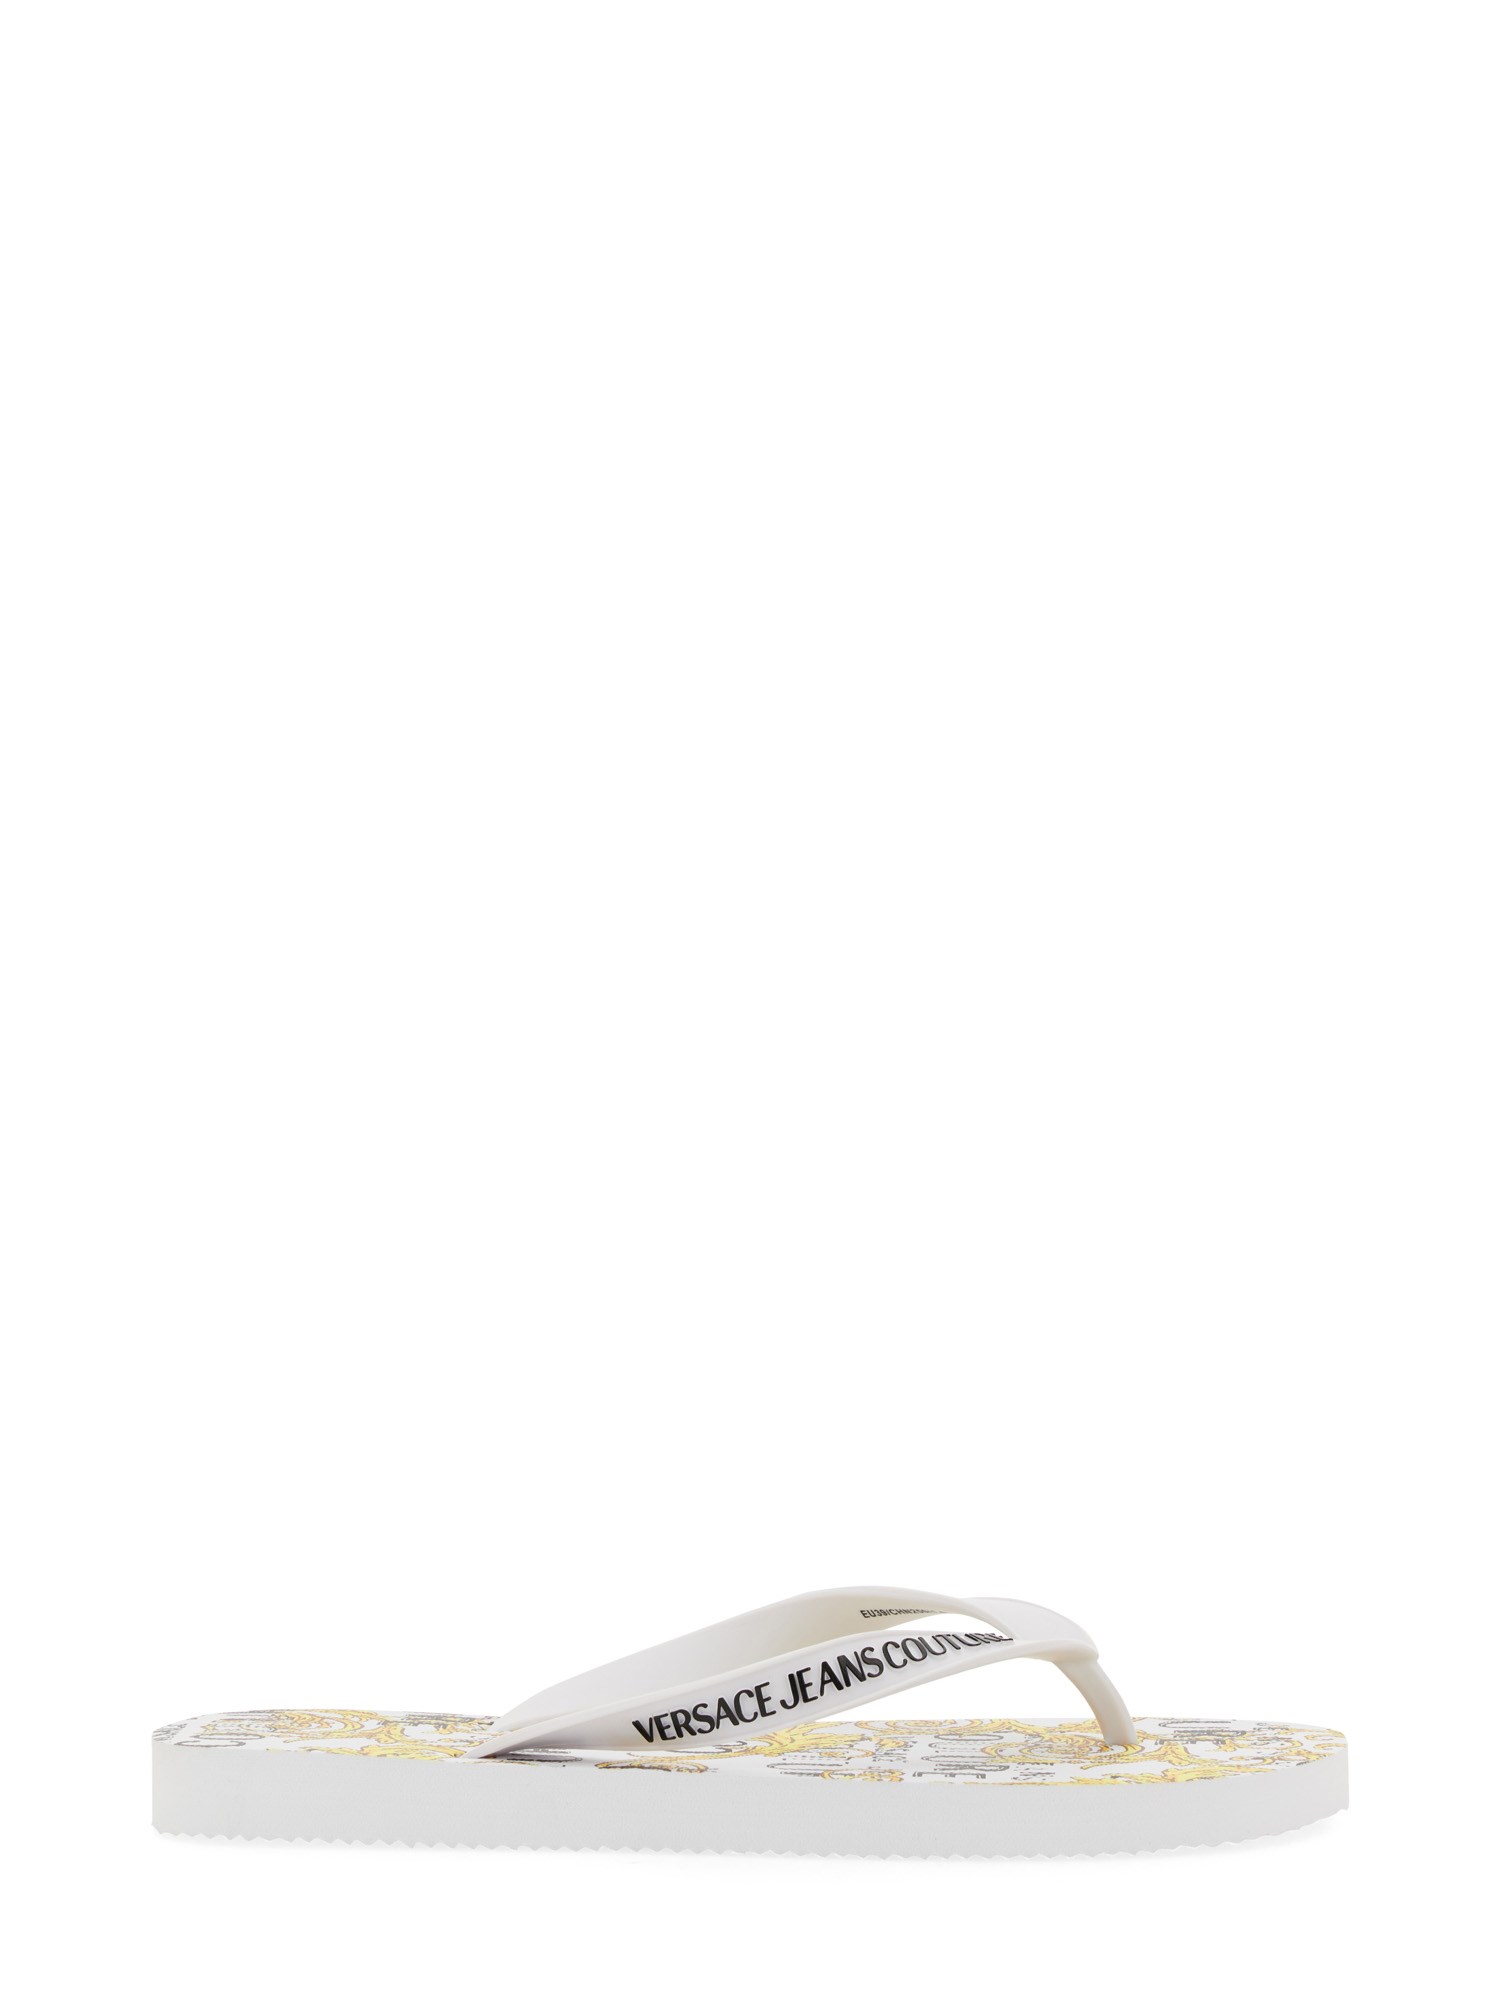 Versace Jeans Couture Thong Sandal In White